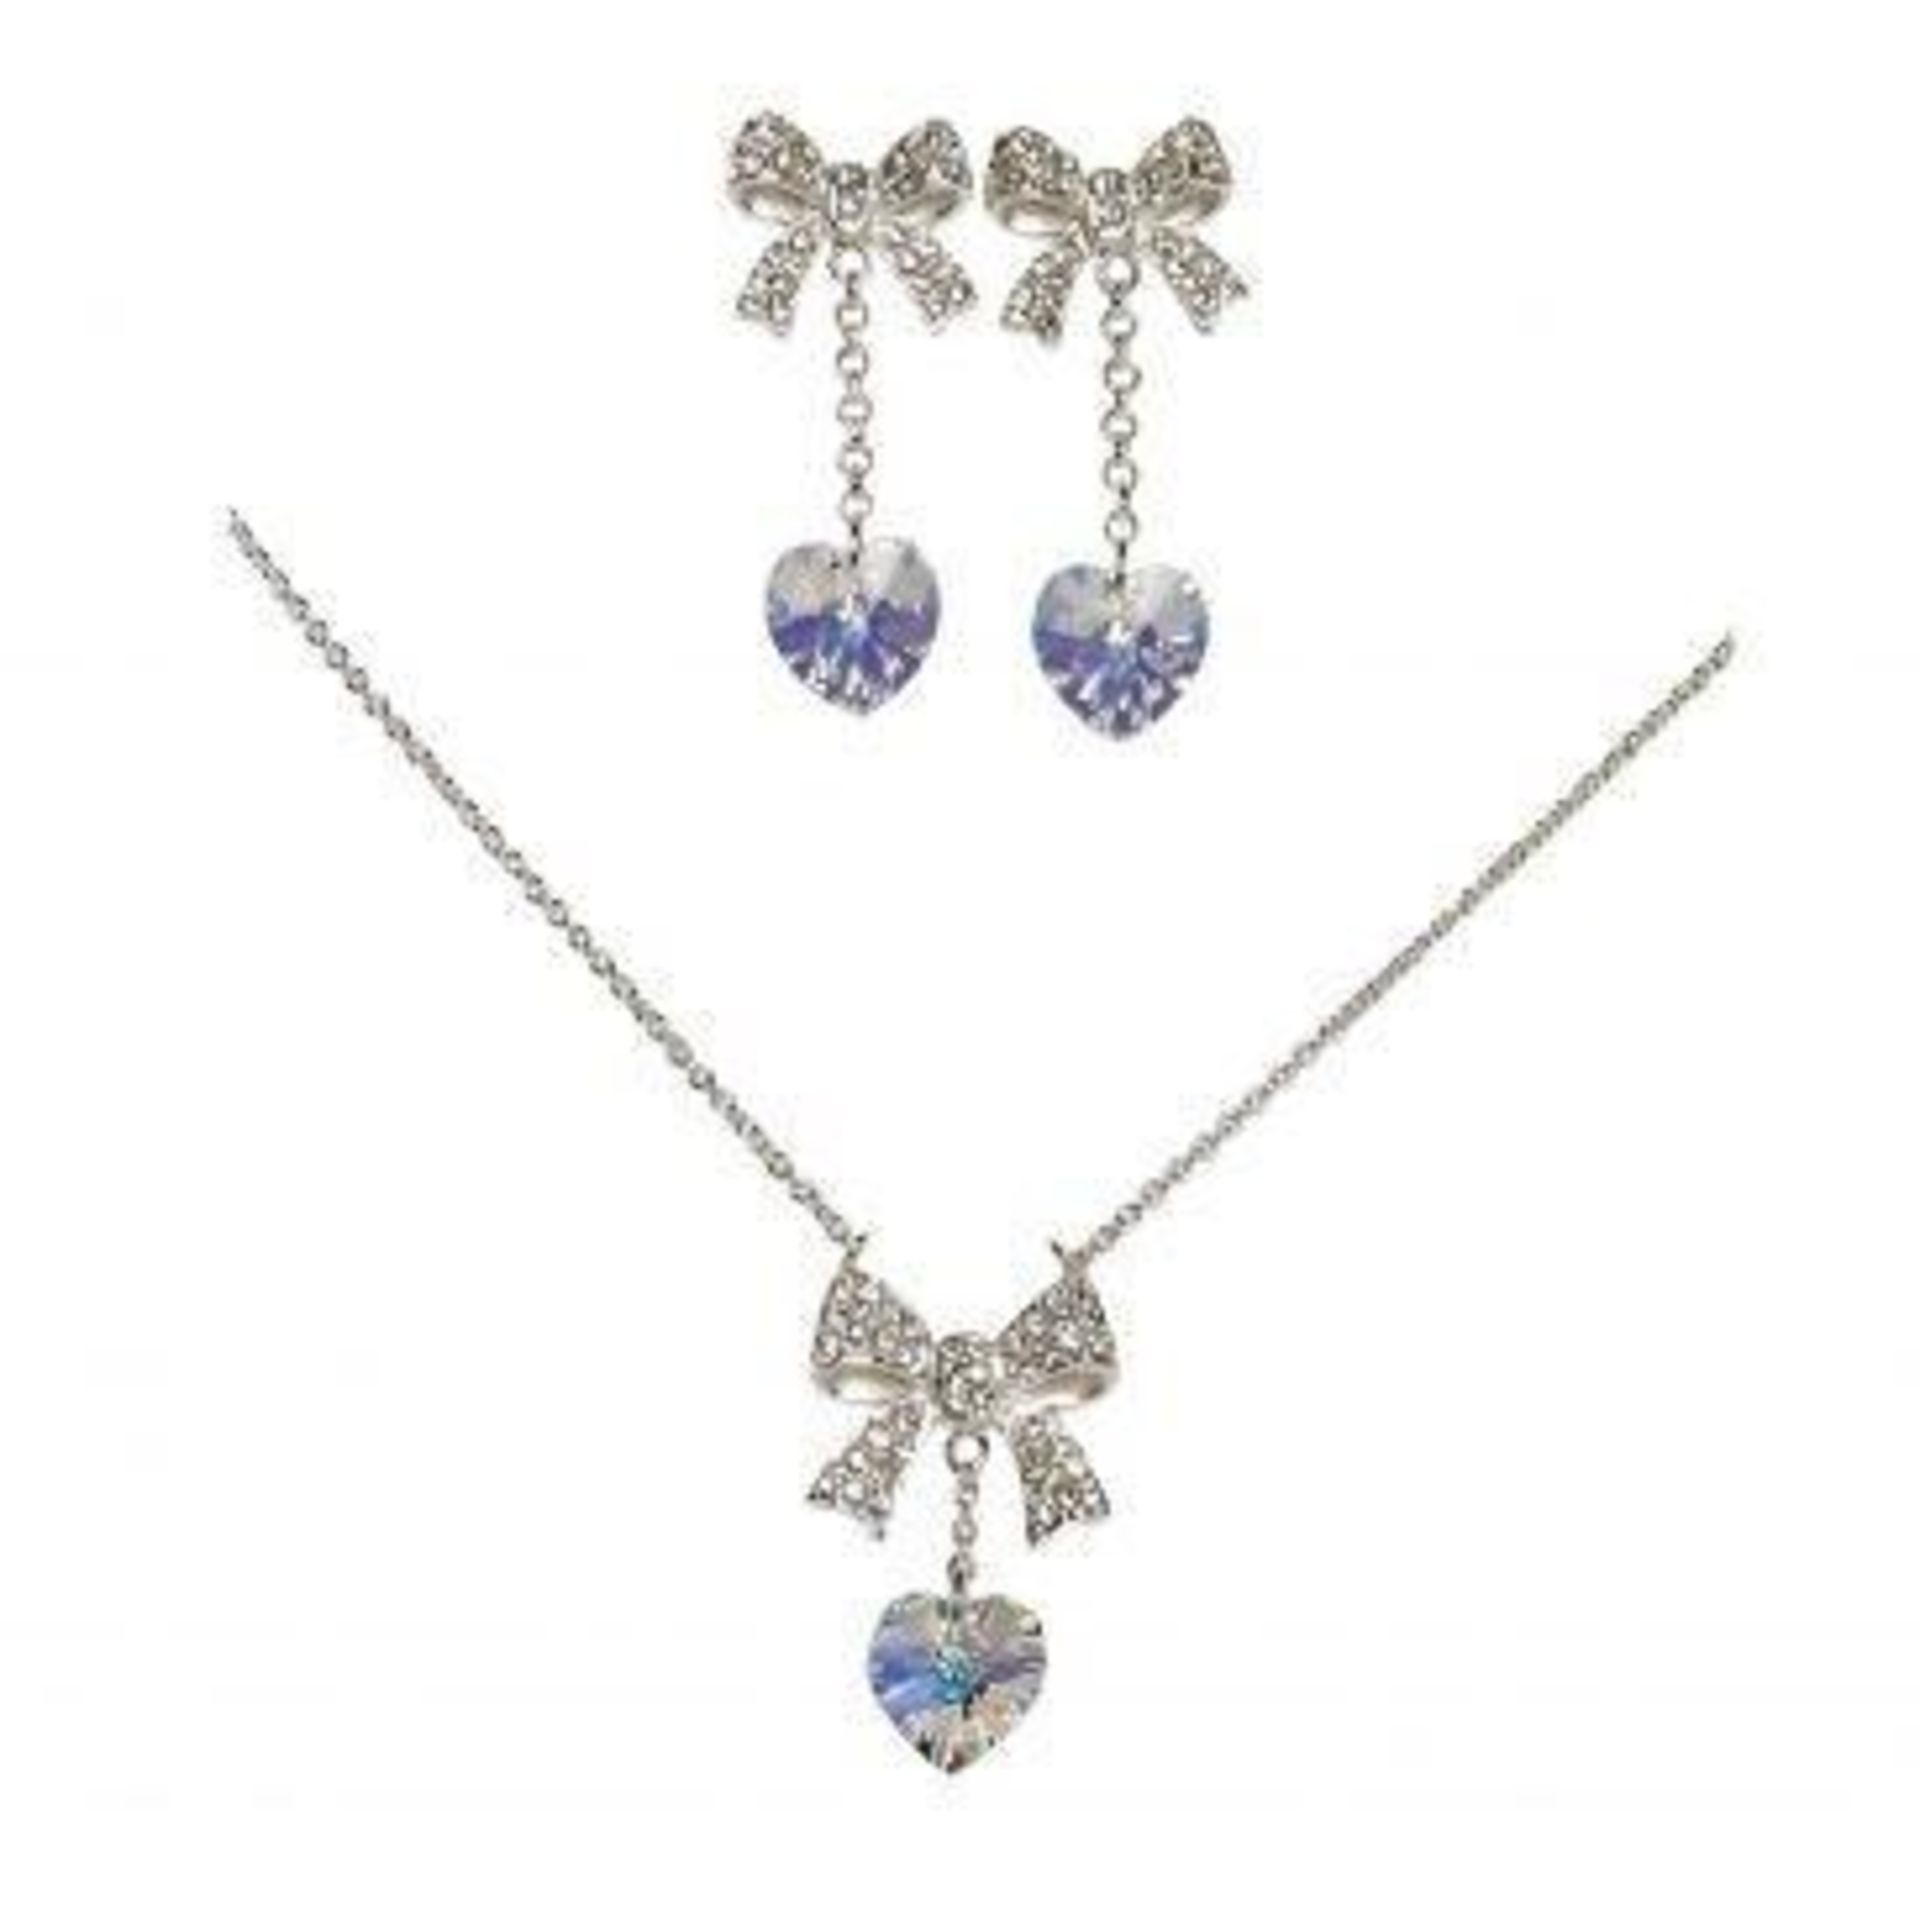 20 x HEART PENDANT AND EARRING SETS By ICE London - EGJ-9900 - Silver-tone Curb Chain Adorned With - Image 2 of 3